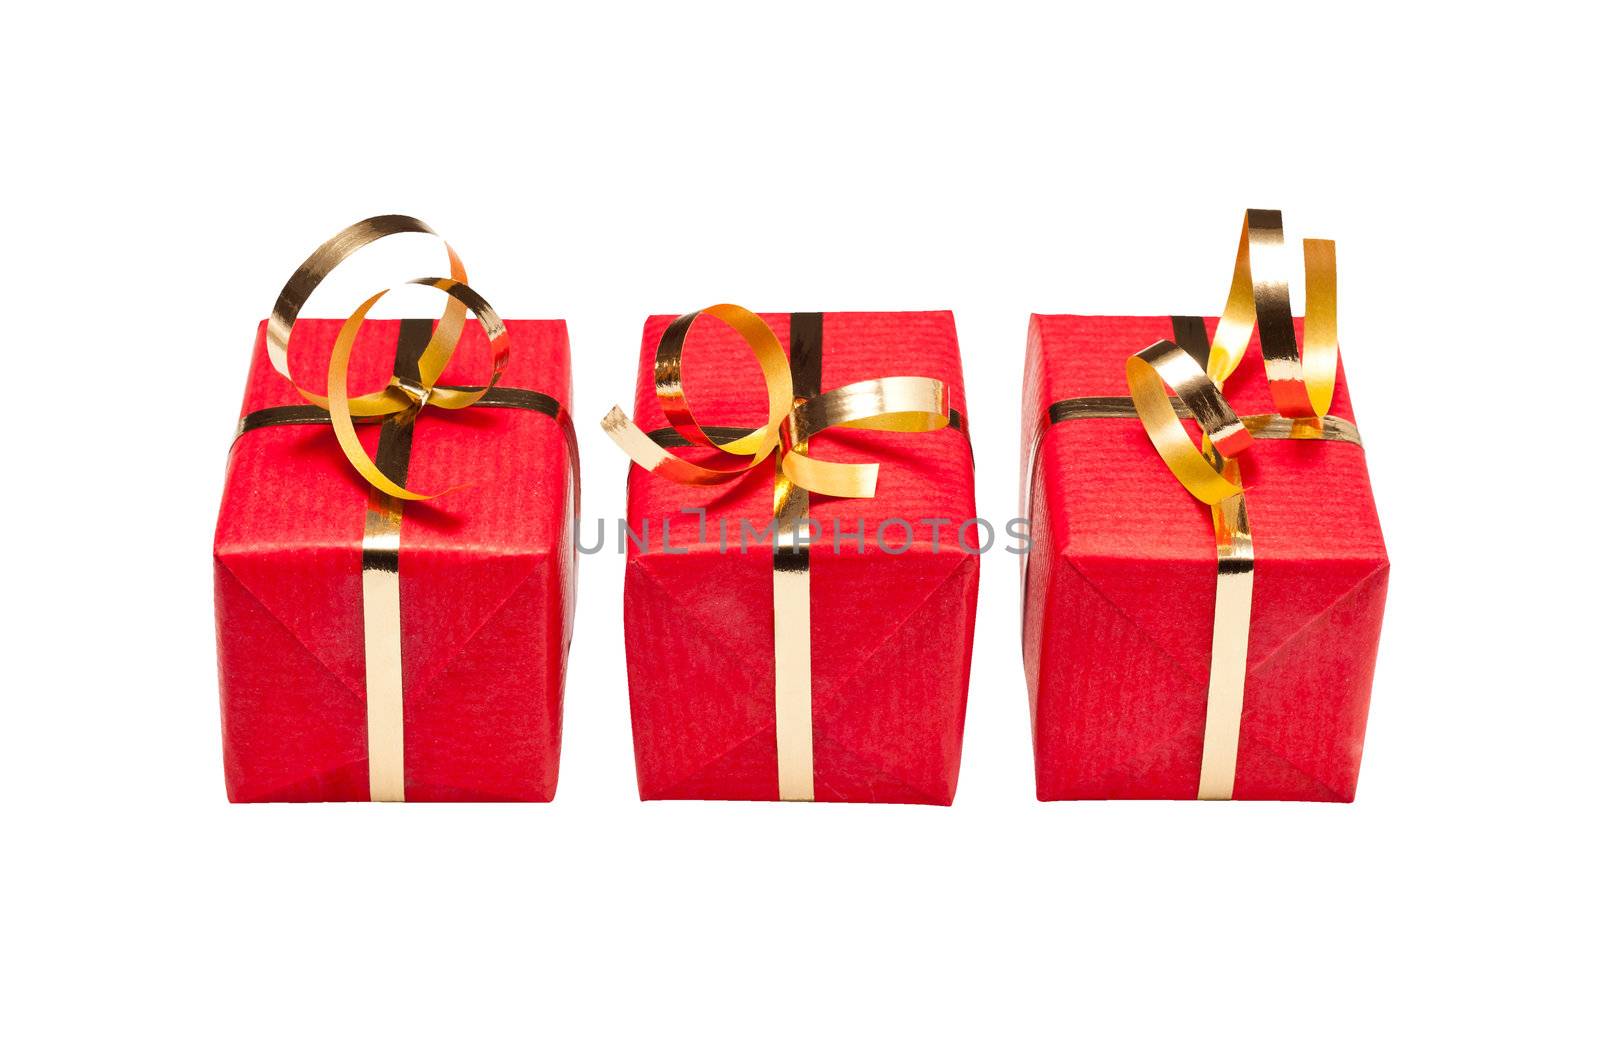 Trio of Red and Gold Xmas Gift Boxes by timh